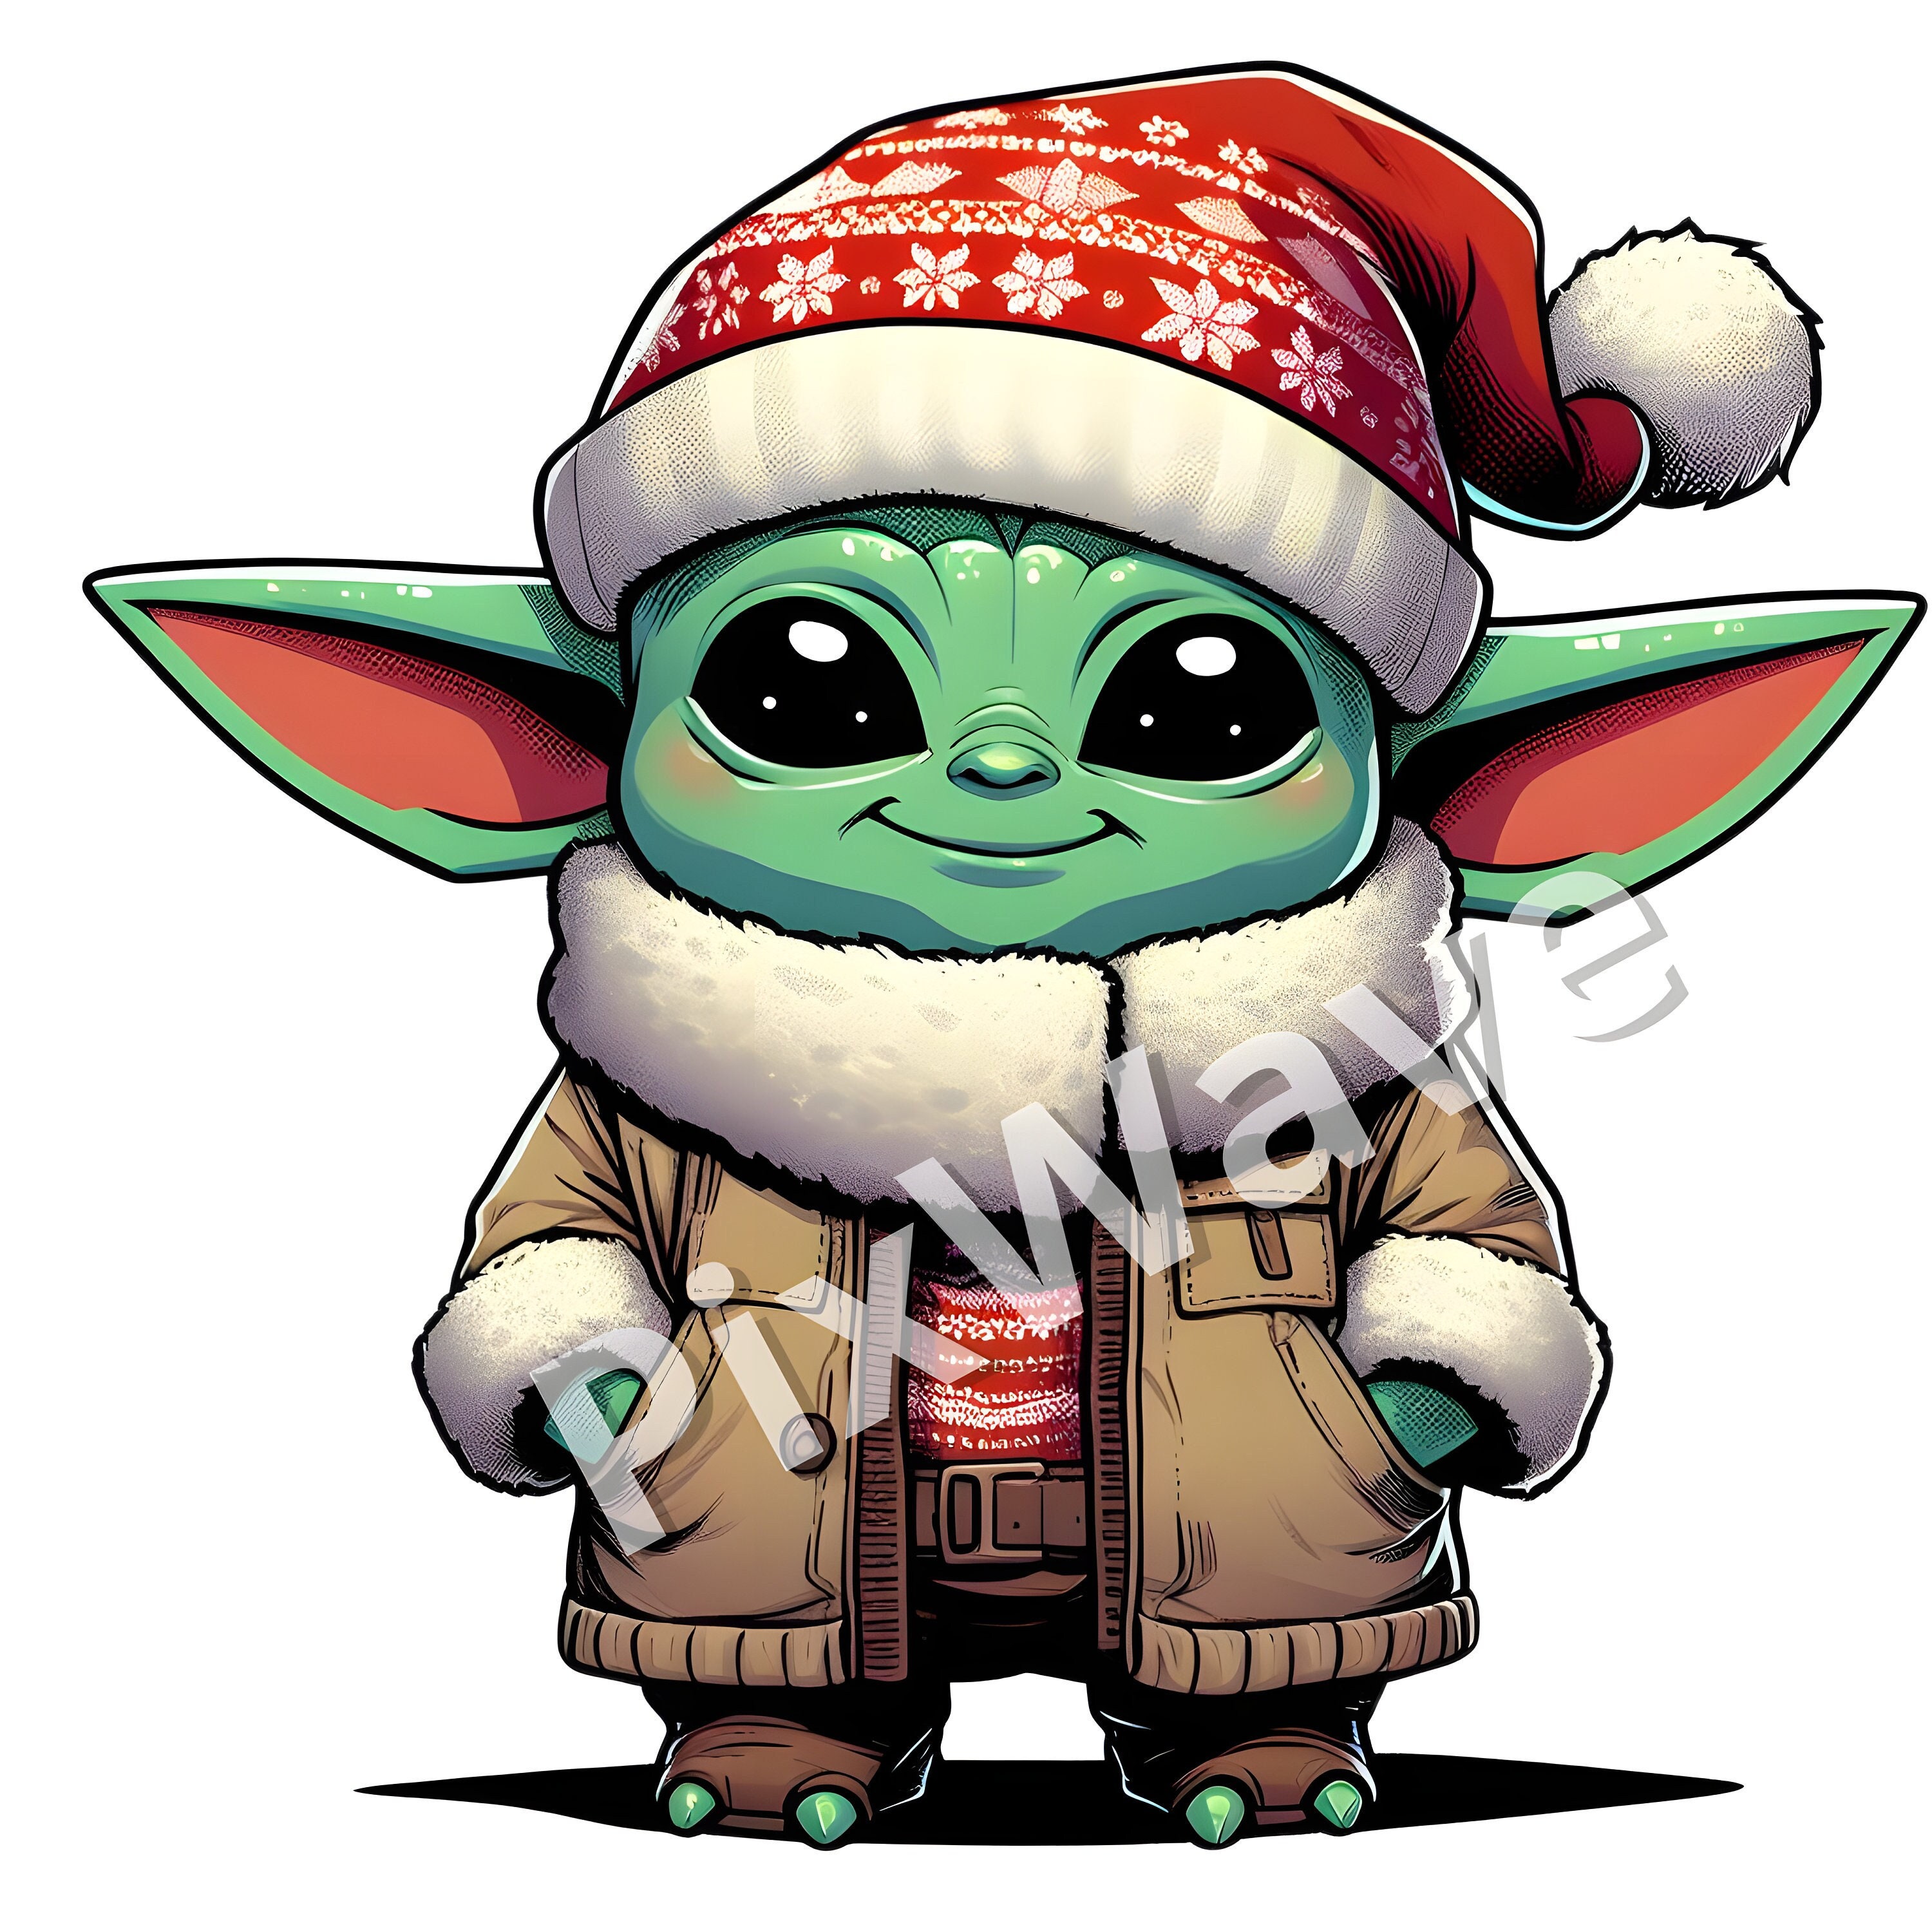  Star Wars Christmas Decorations - Yoda with Santa Claus Hat -  Jedi Holiday Vinyl Wall Decal for Home Decor and Parties : Handmade Products